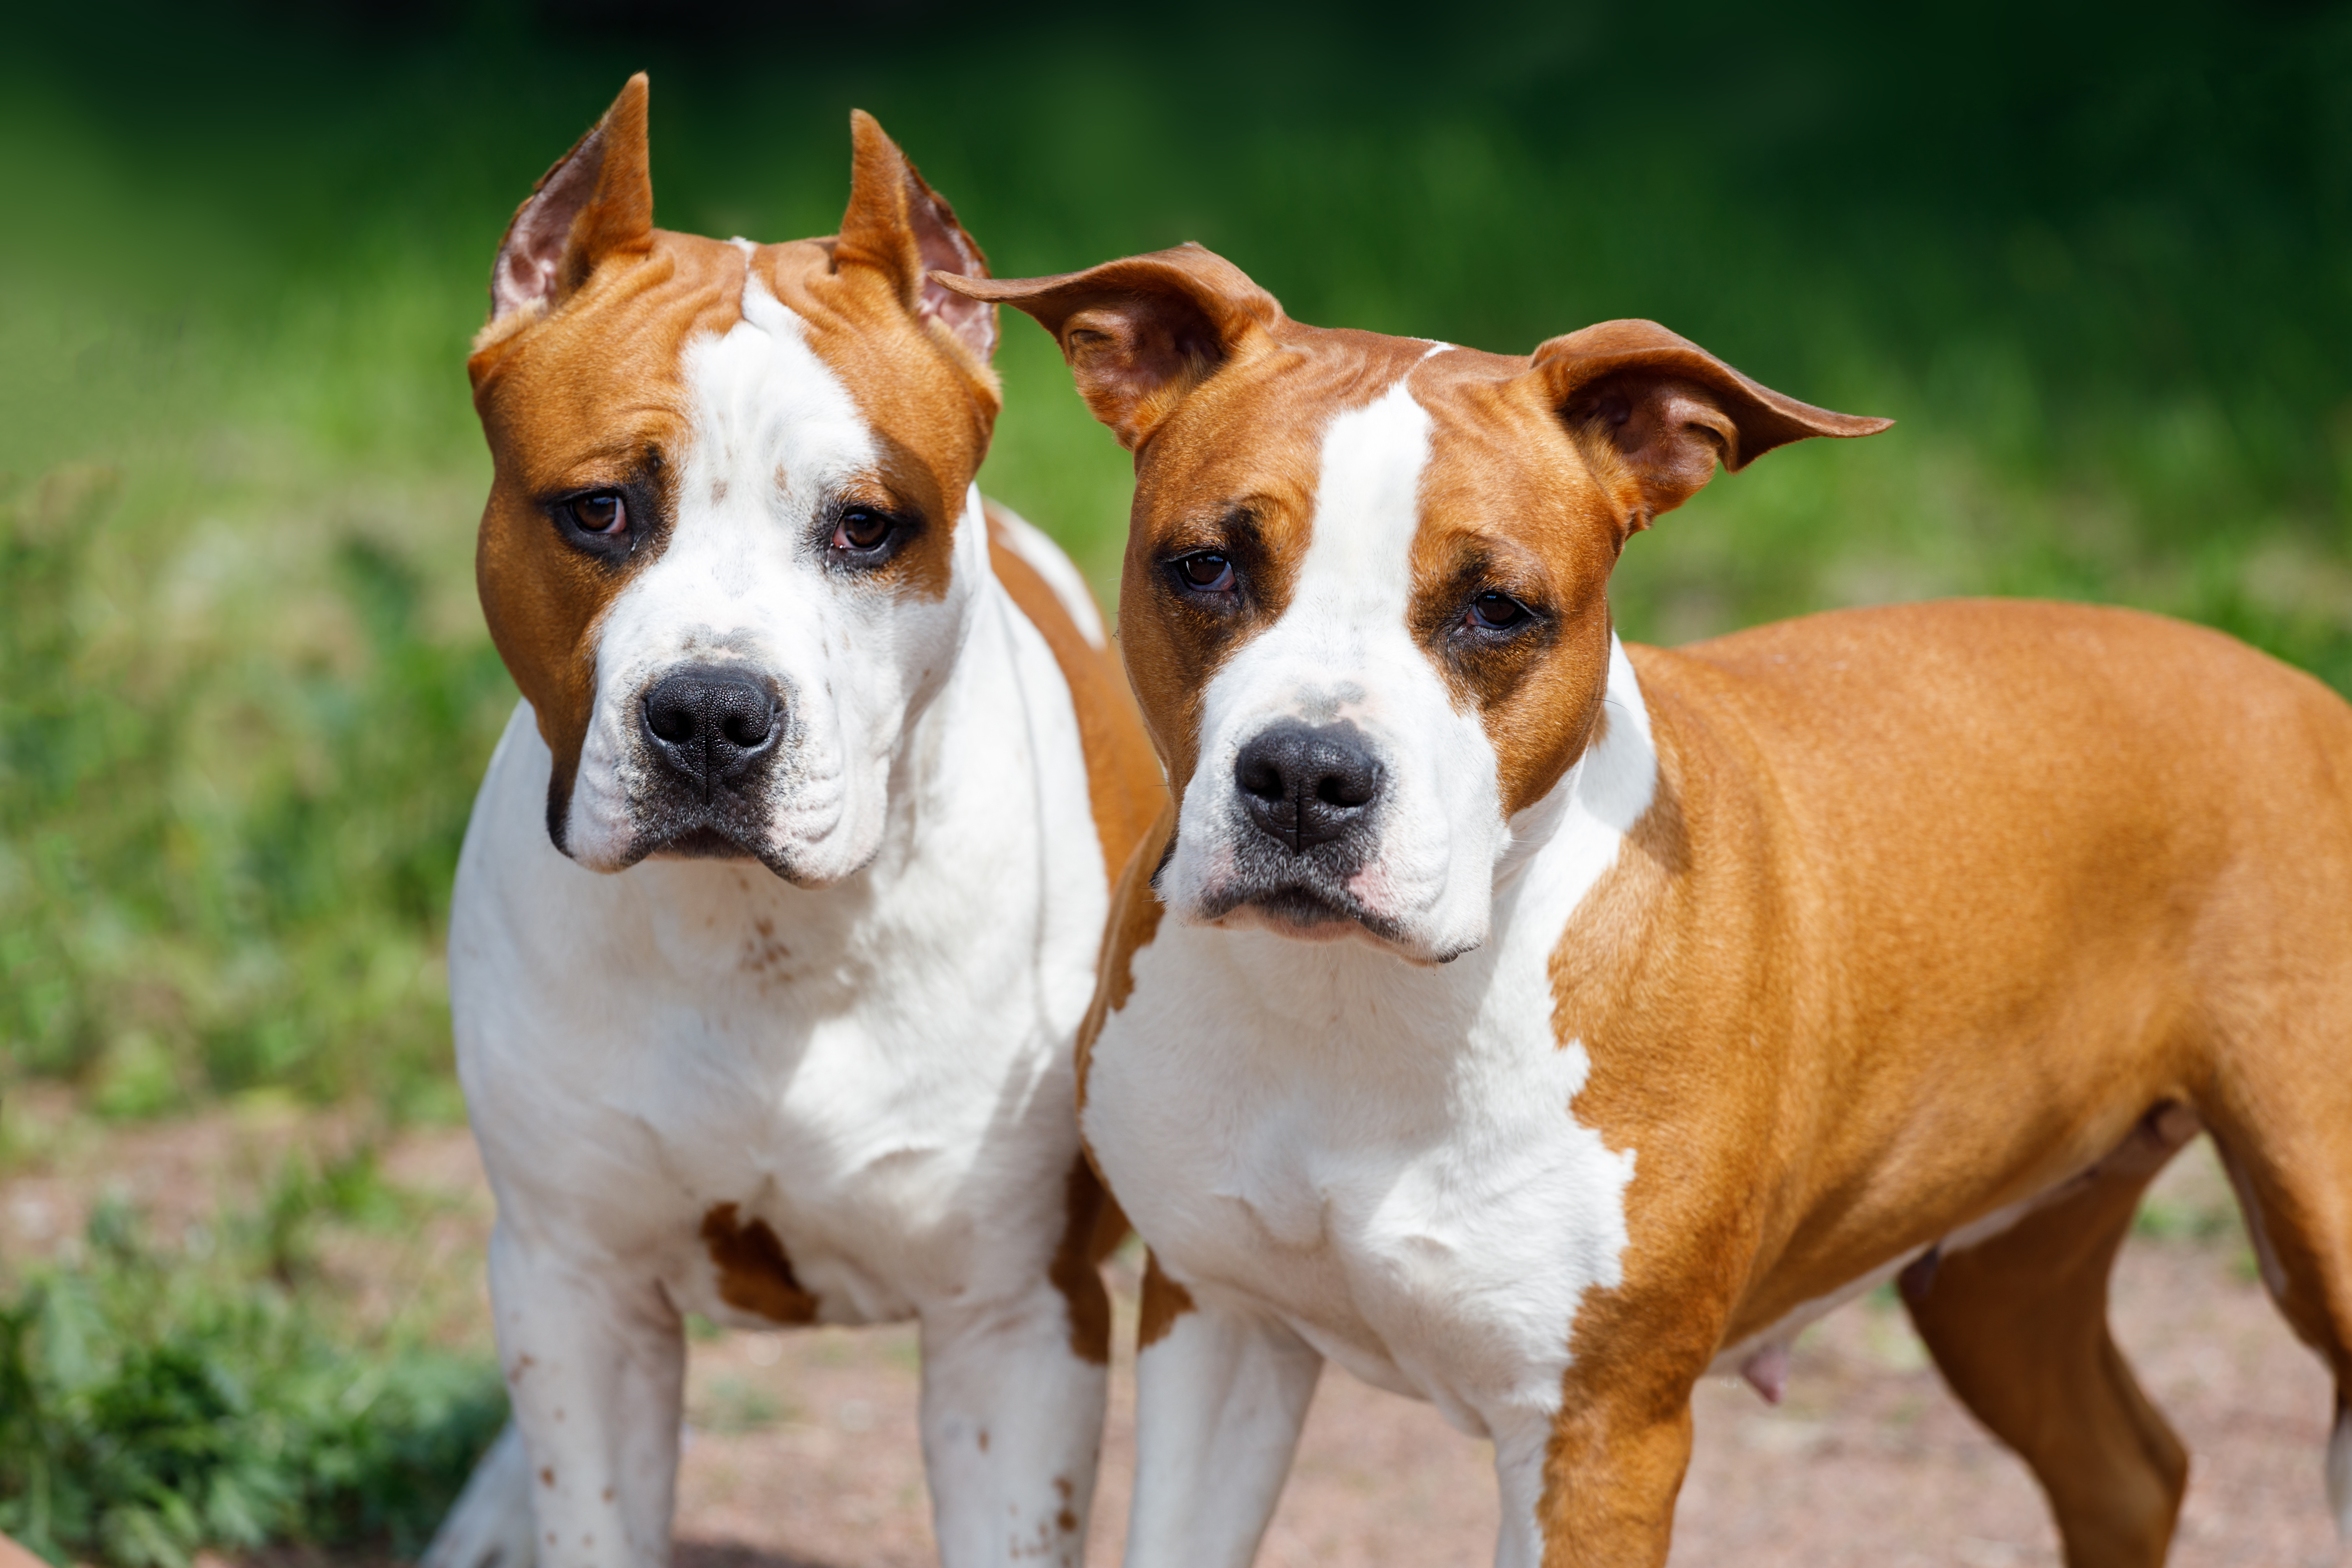 Two pit bull terriers | Source: Shutterstock